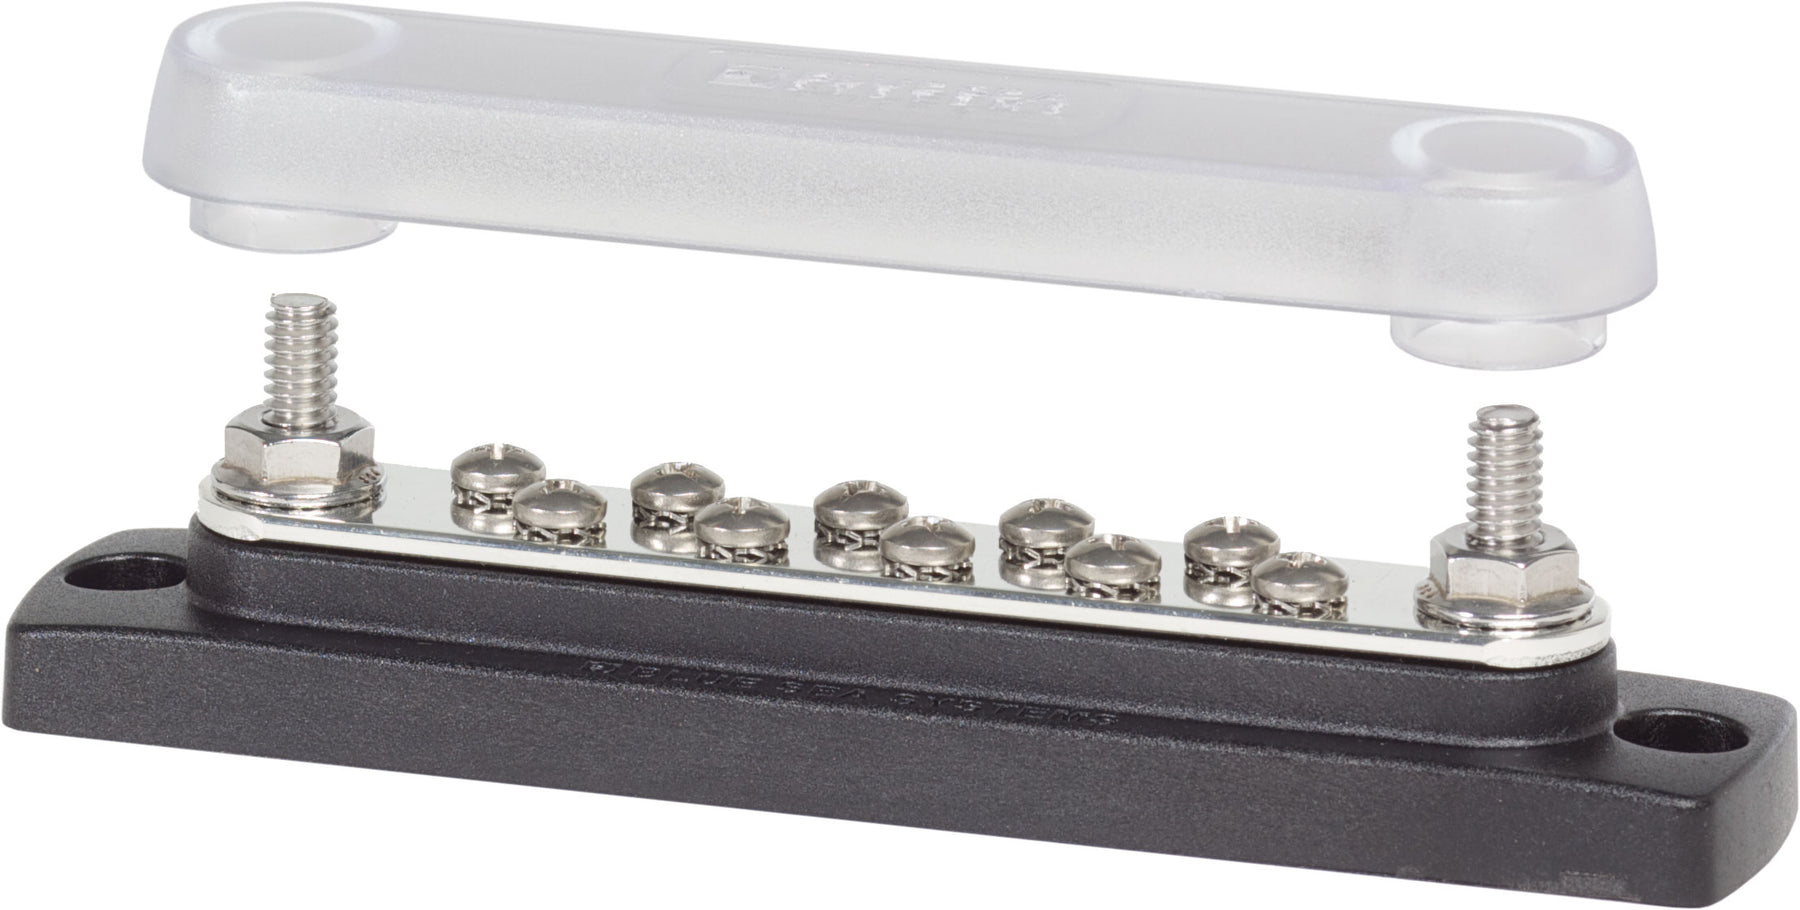 Blue Sea Systems Common 150A BusBar - 10 Gang with Cover 2300